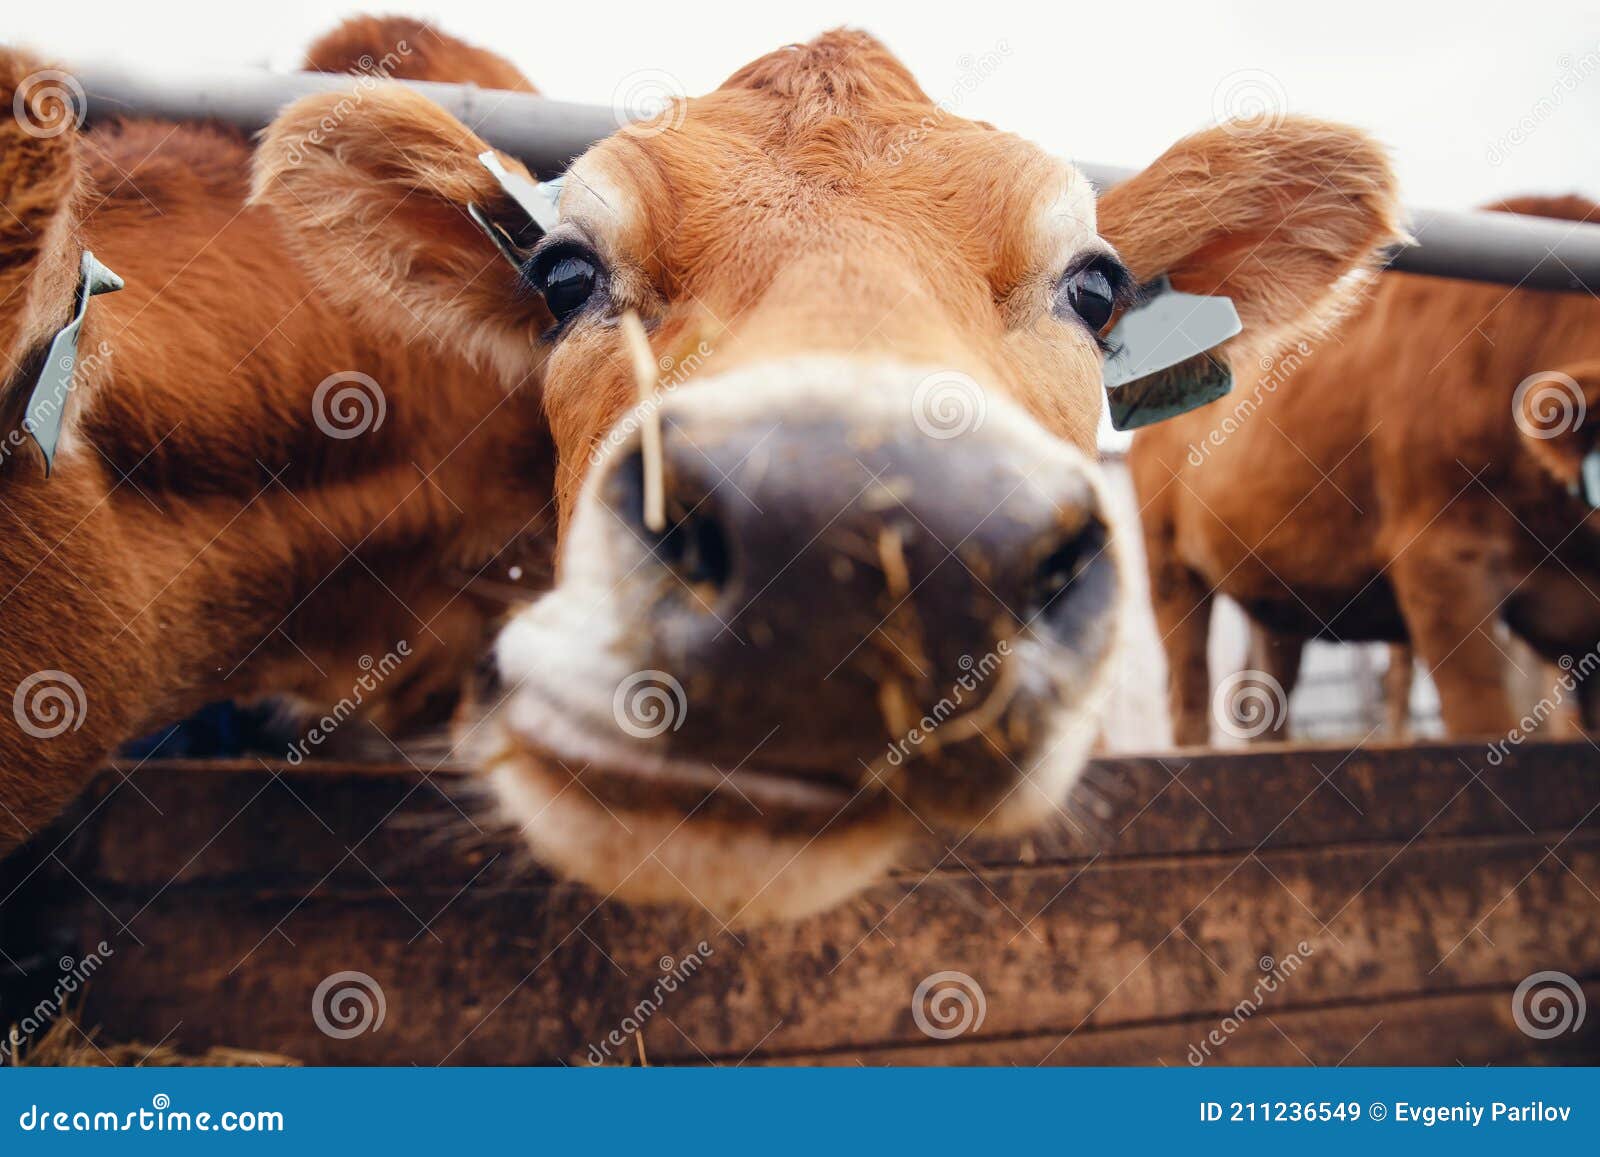 Portrait Of Red Hairy Jersey Smile Cow Funny Face Big Ears Showing Tongue Stock Image Image